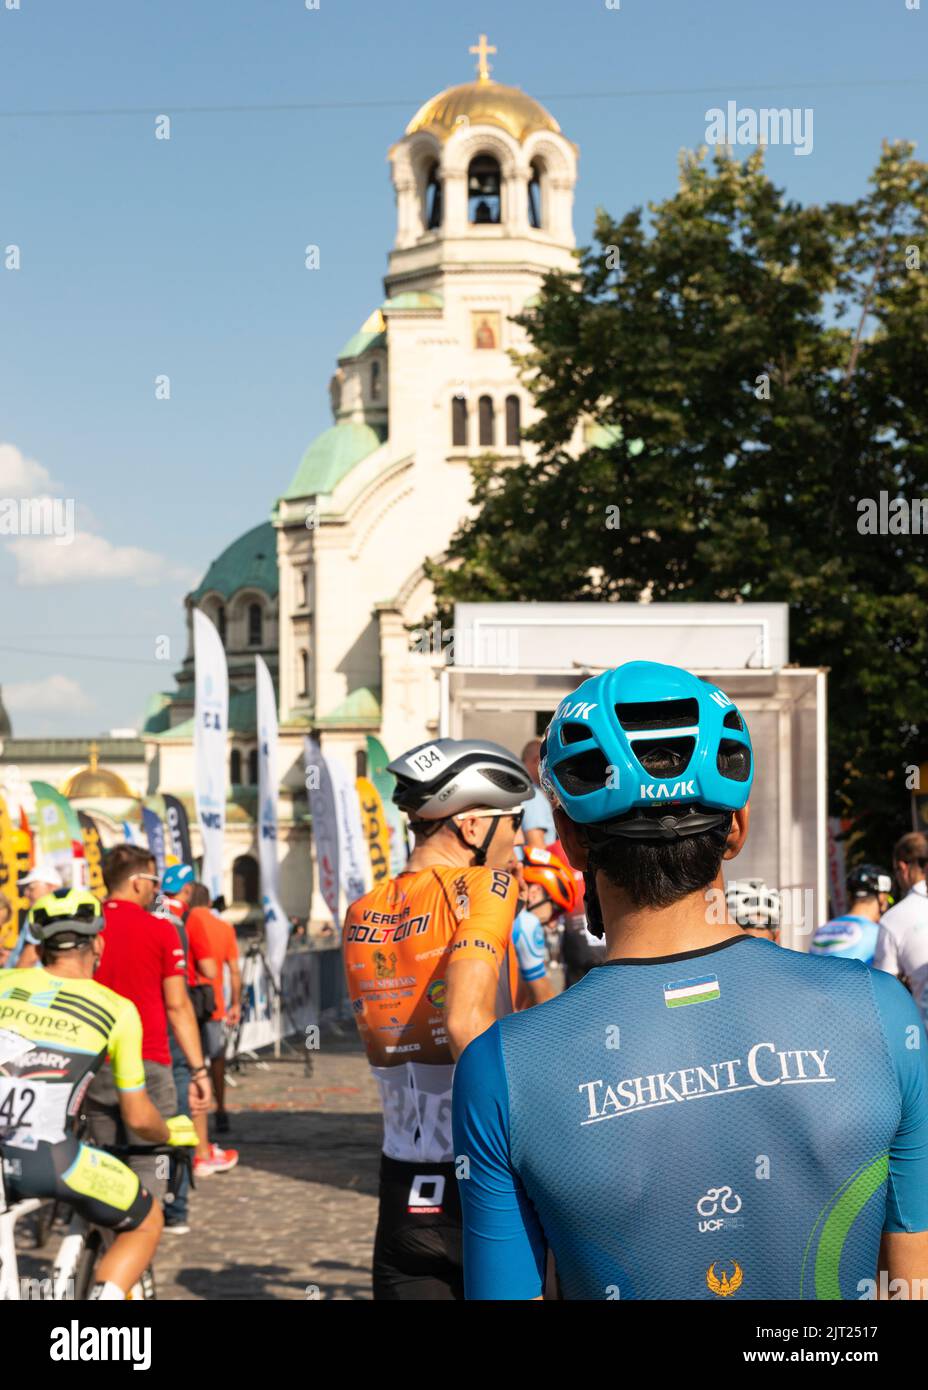 Sofia, Bulgaria, 27 August 2022. Cyclists participate in the 2022 issue of the Tour of Bulgaria cycling competition during the opening prologue round in the Bulgarian capital. Credits: Ognyan Yosifov / Alamy Live News Stock Photo